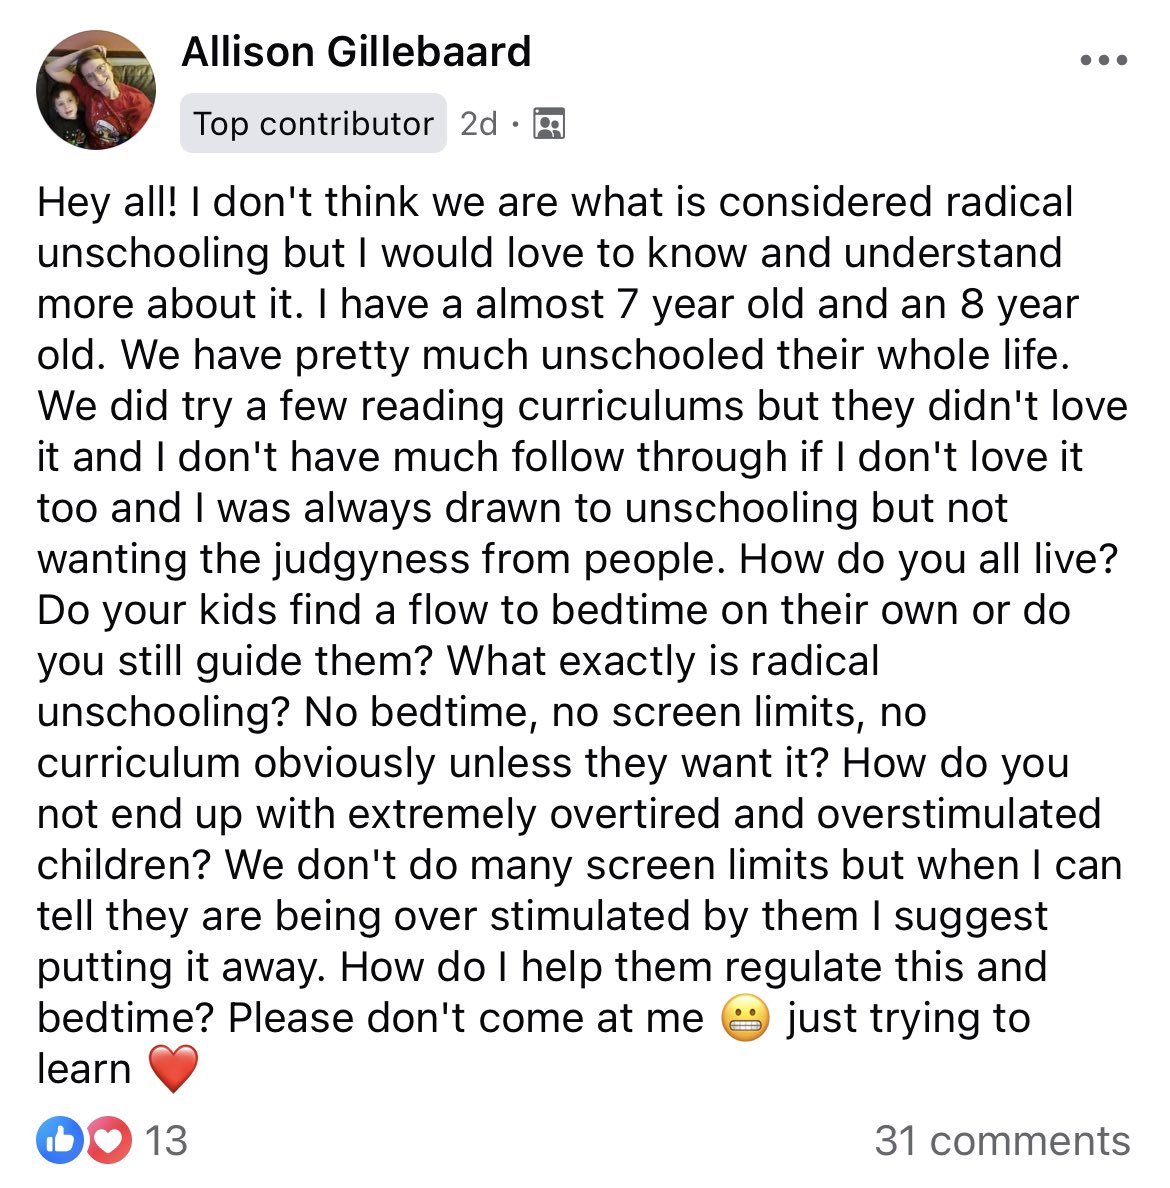 document - Allison Gillebaard Top contributor 2d A ... Hey all! I don't think we are what is considered radical unschooling but I would love to know and understand more about it. I have a almost 7 year old and an 8 year old. We have pretty much unschooled